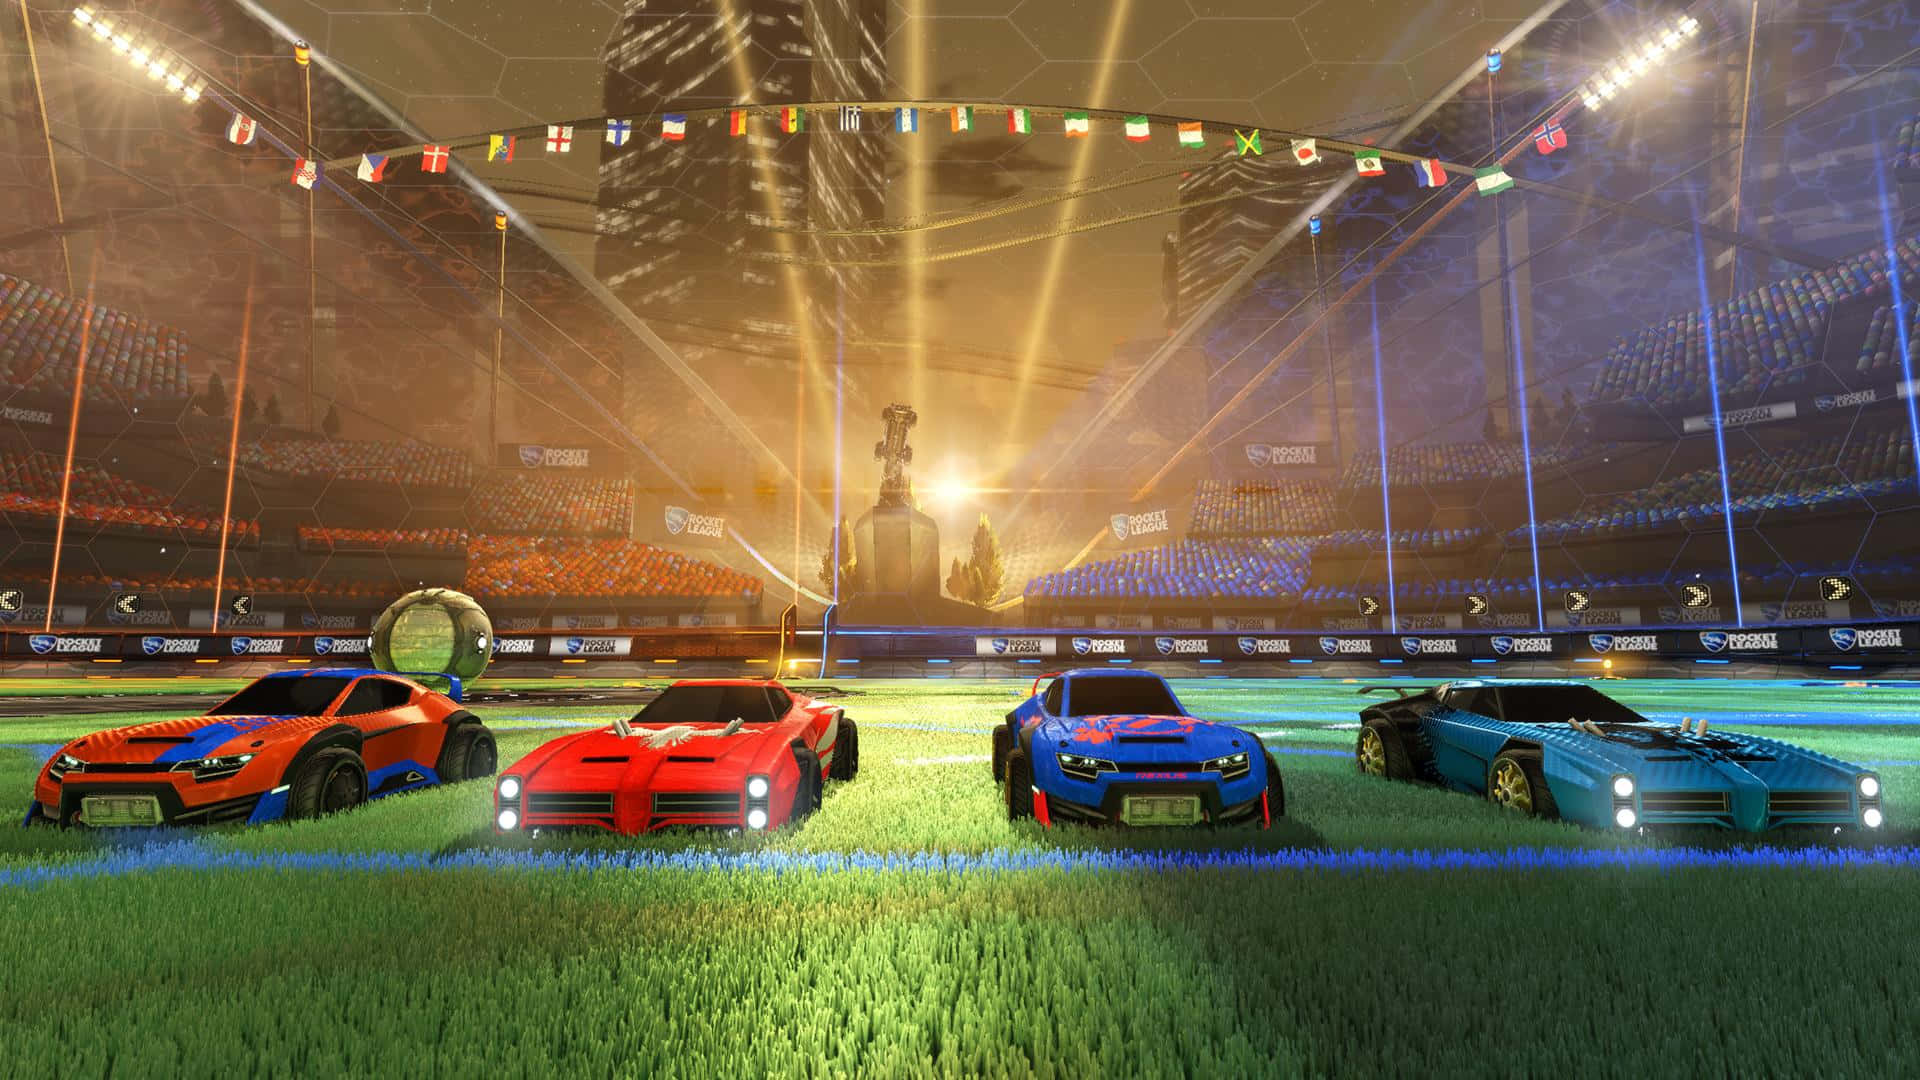 Challenge The Flying Ball In Rocket League